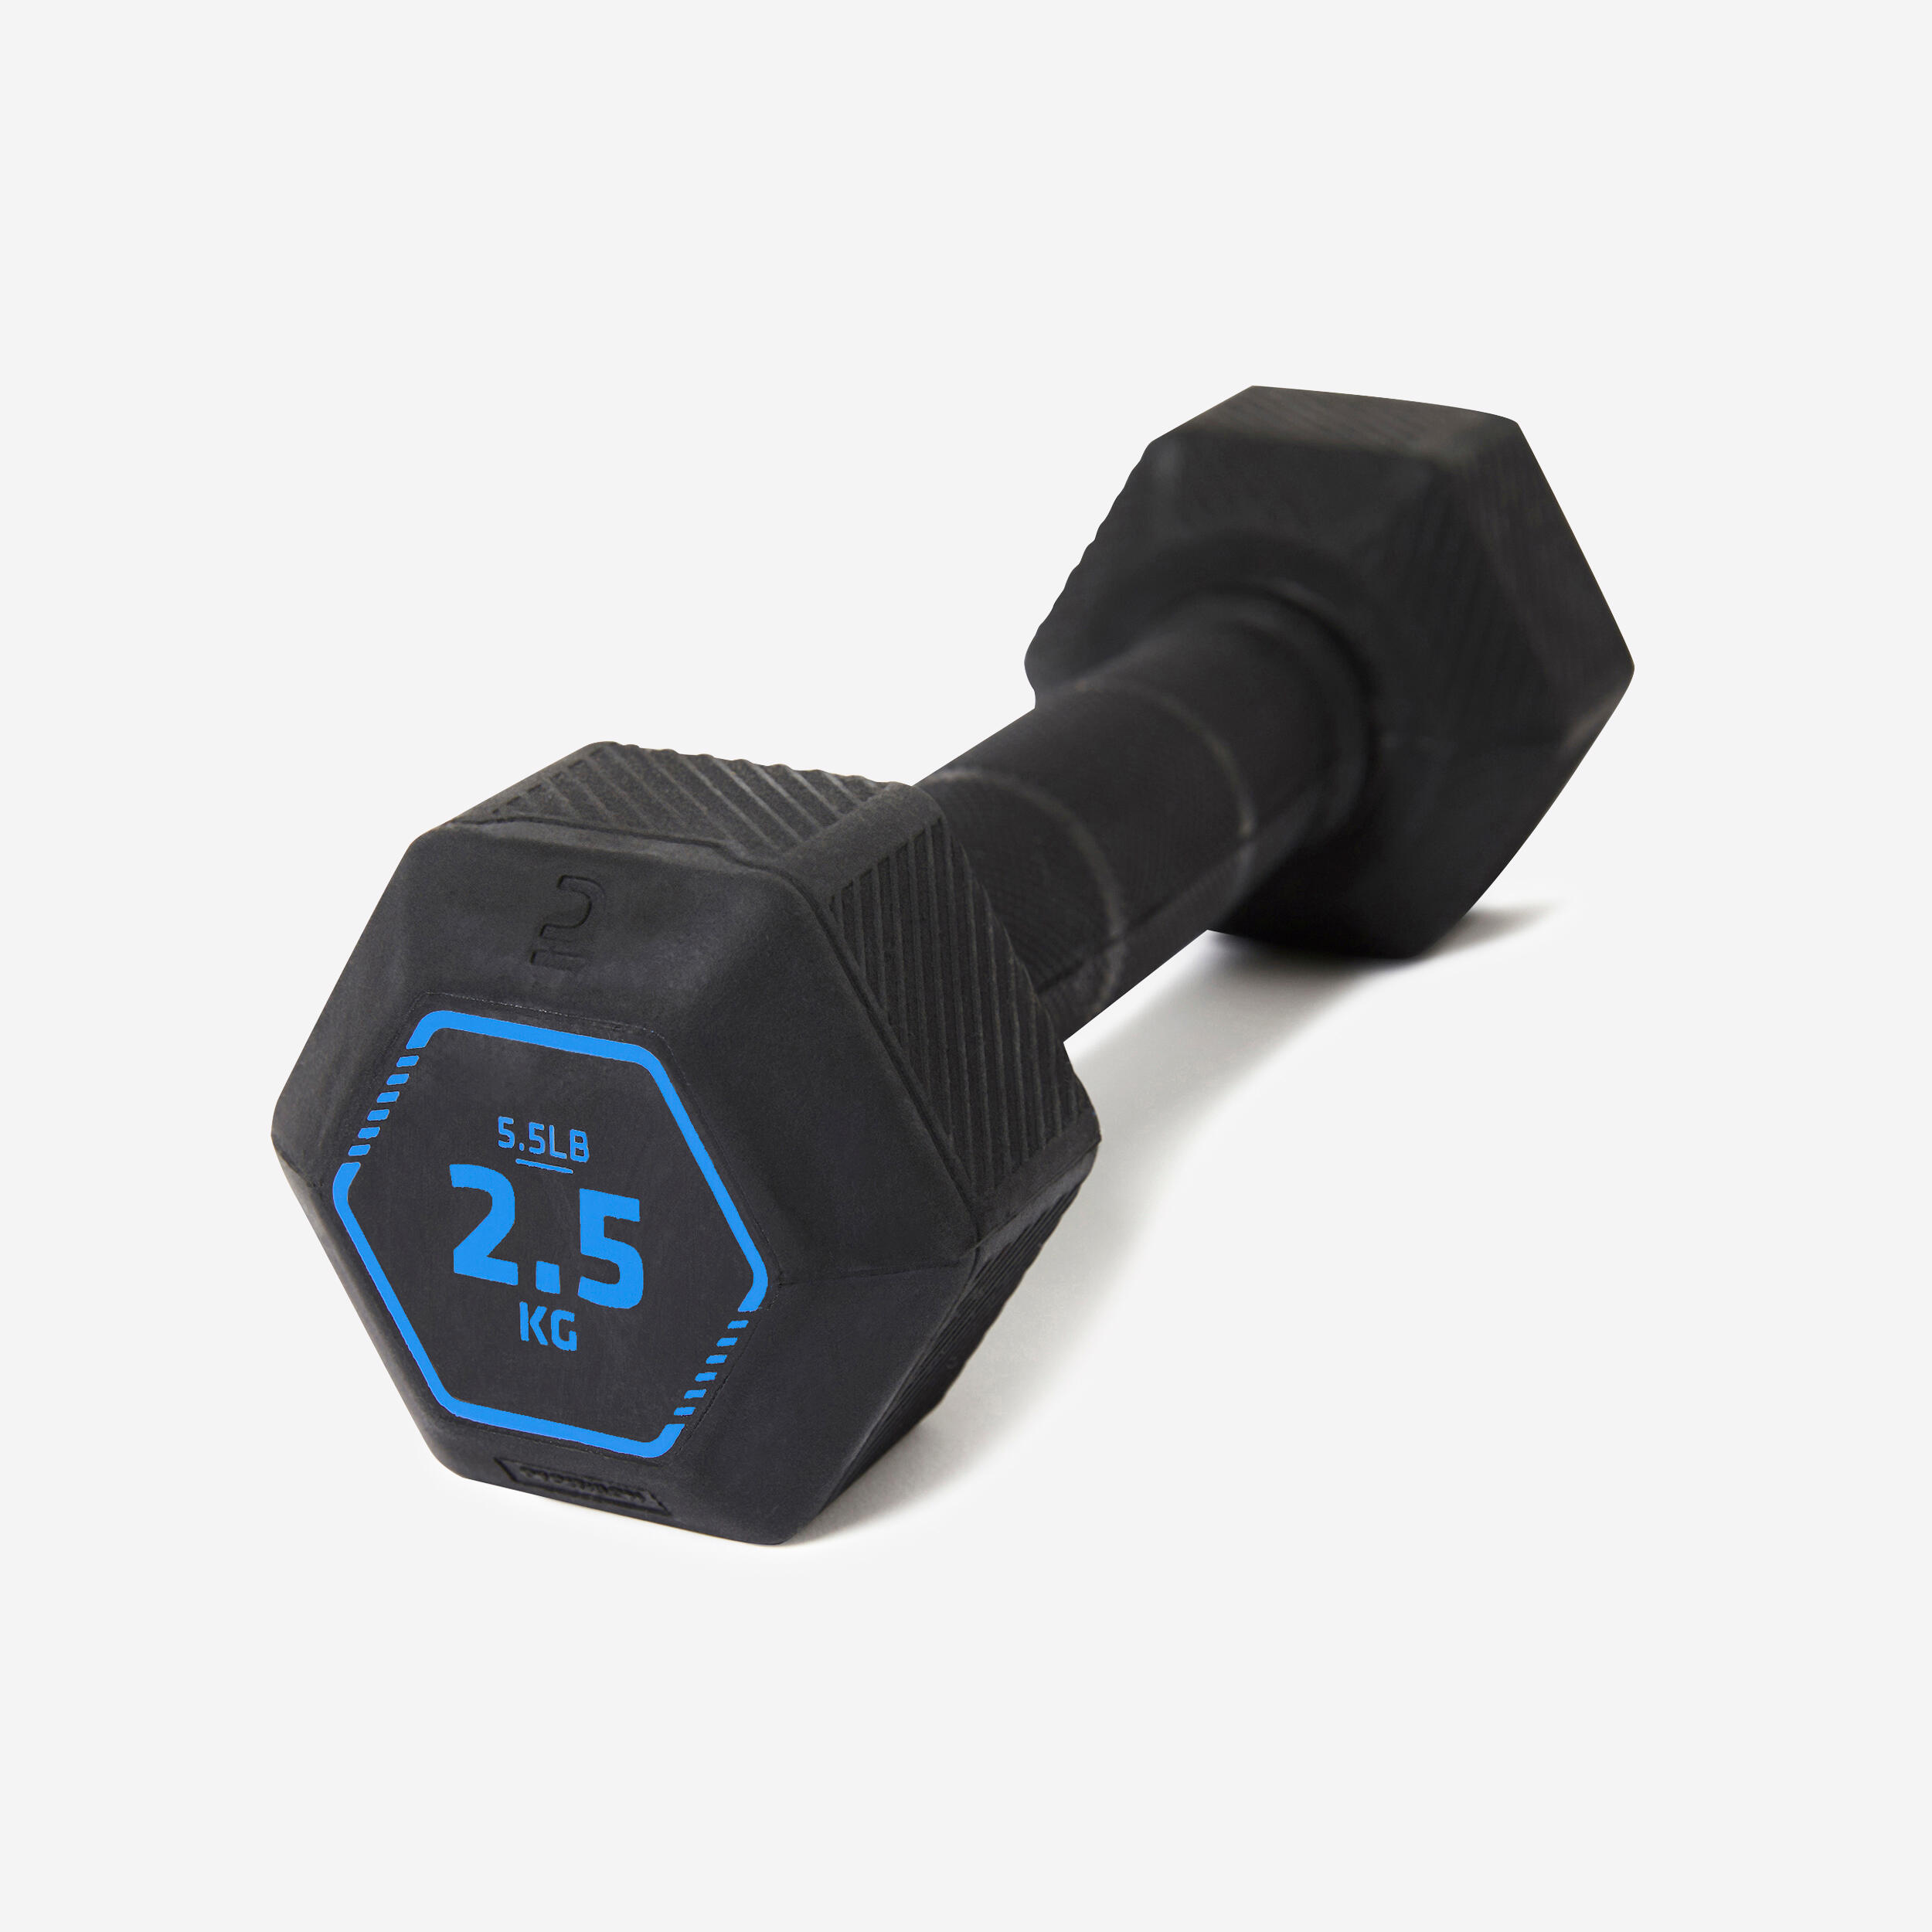 CORENGTH Cross Training and Weight Training Hex Dumbbell 2.5 kg - Black